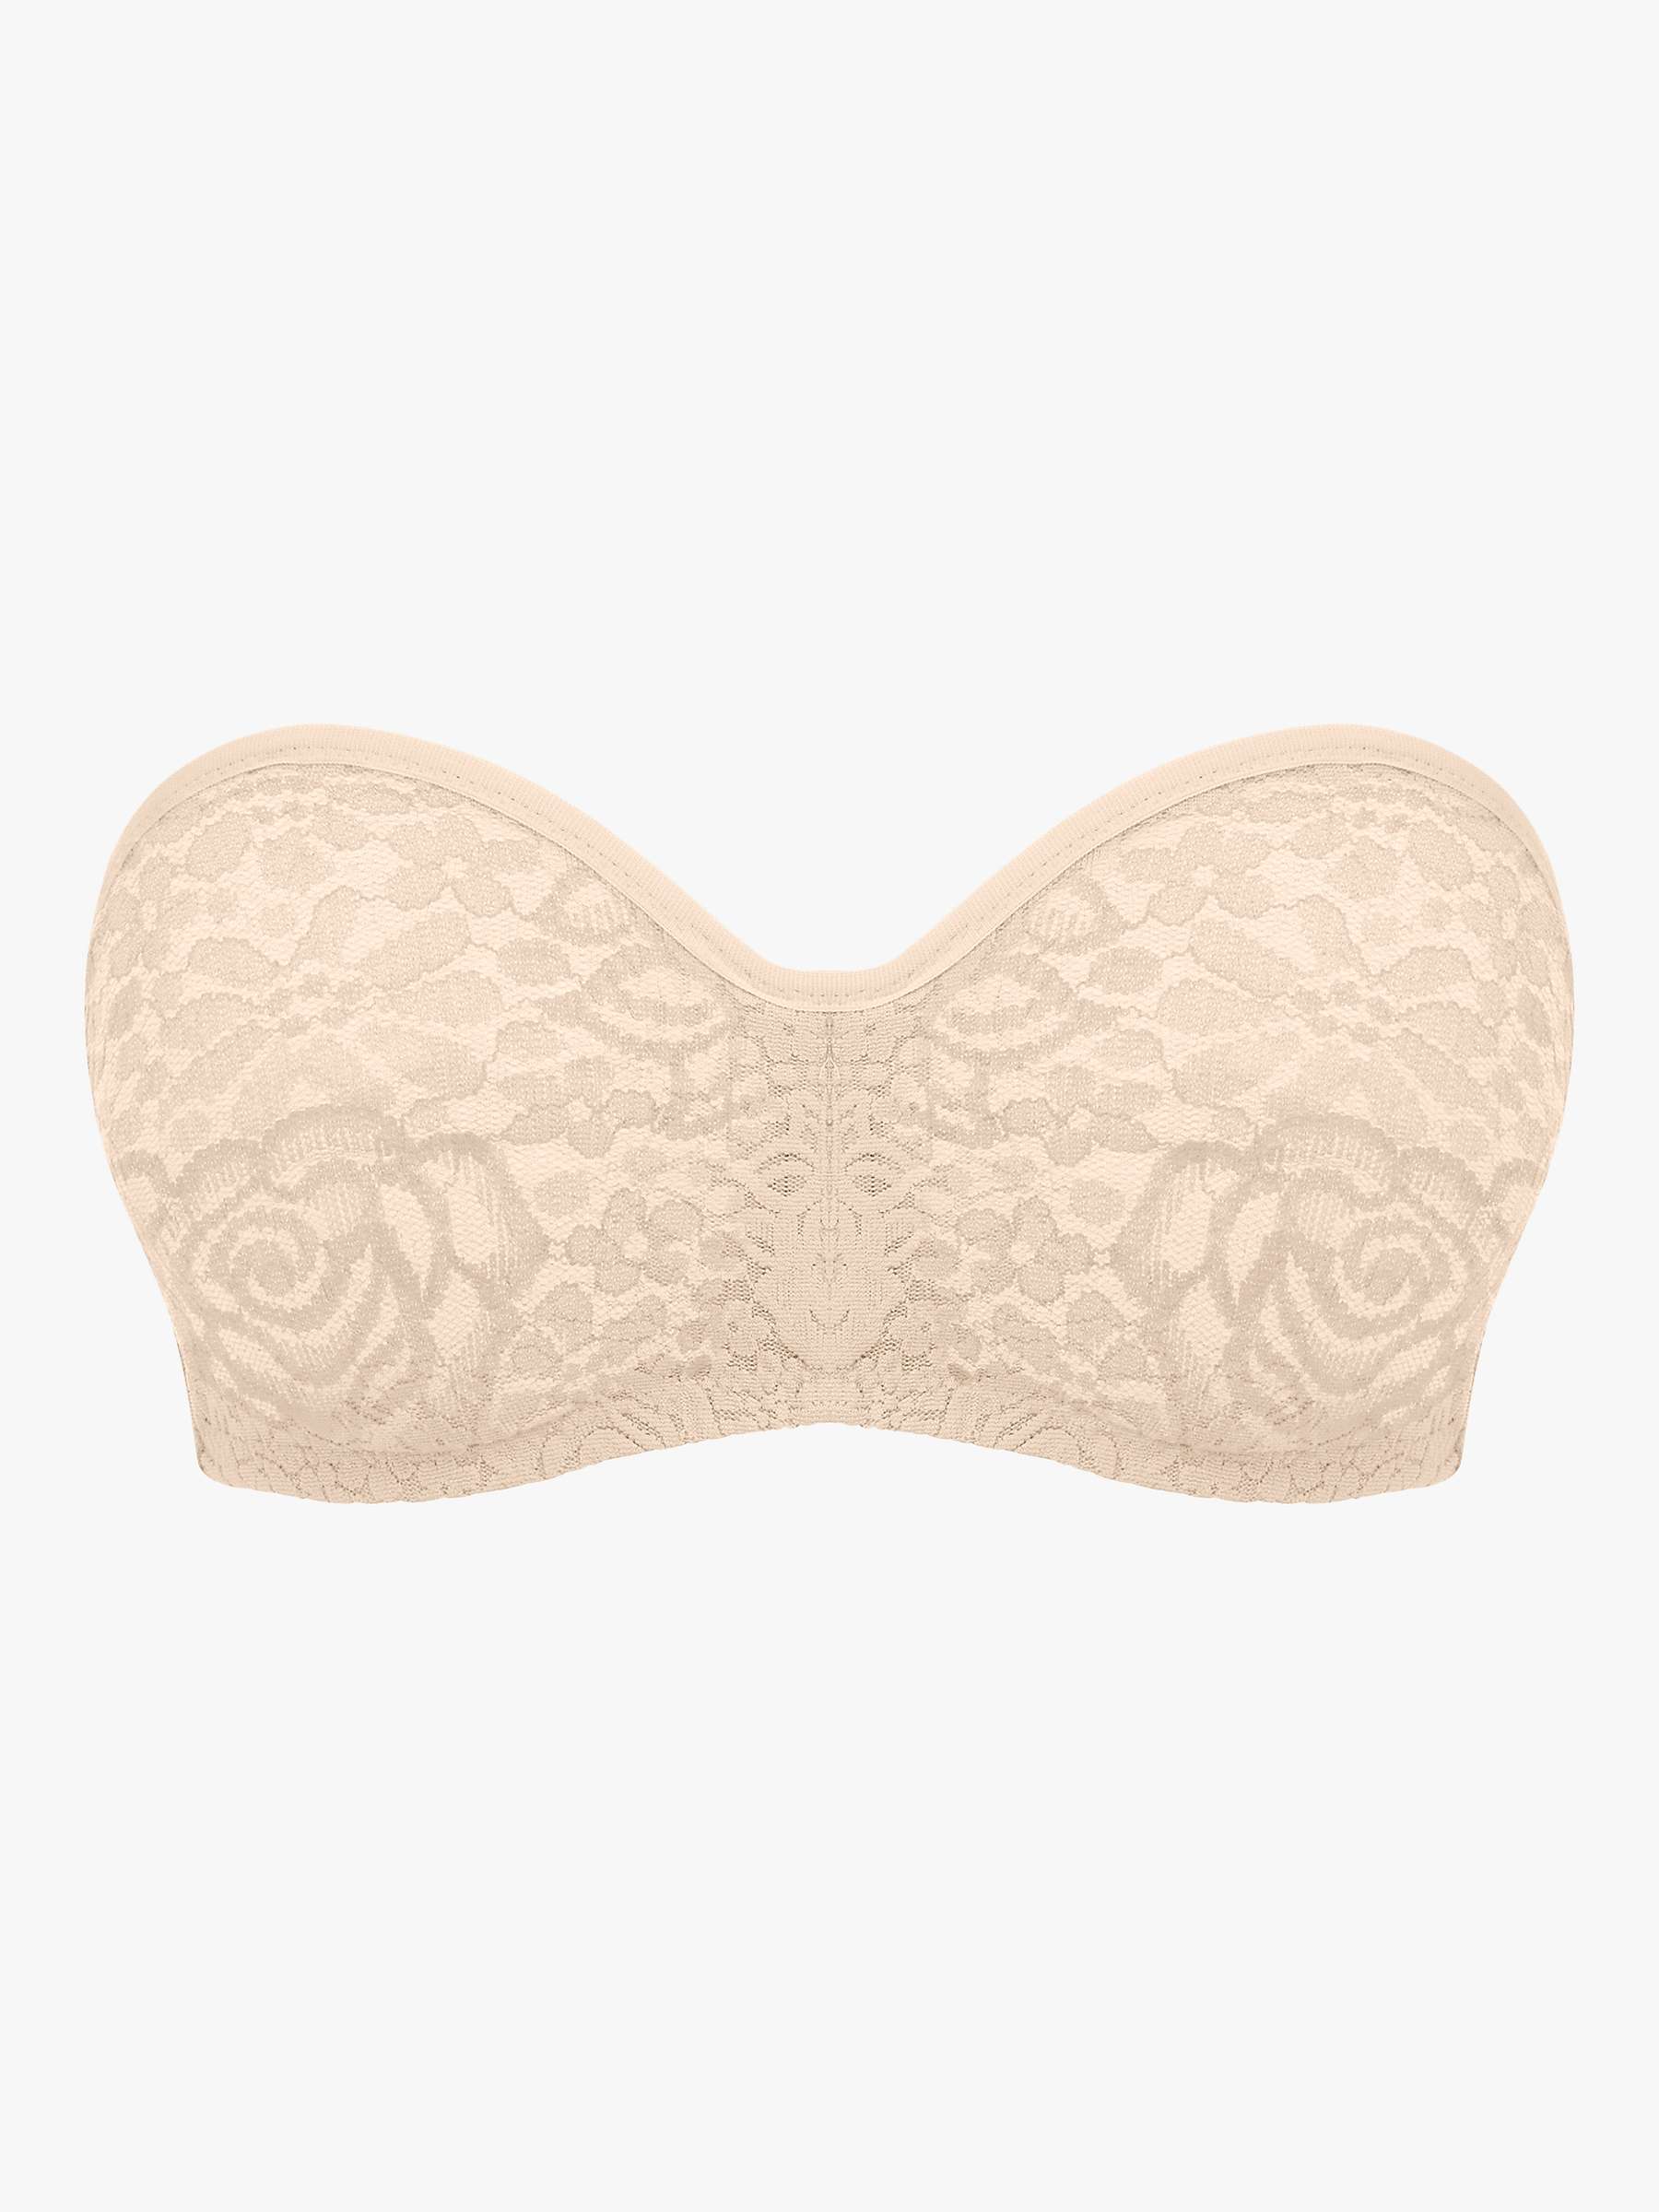 Buy Wacoal Halo Lace Non-Padded Strapless Bra Online at johnlewis.com